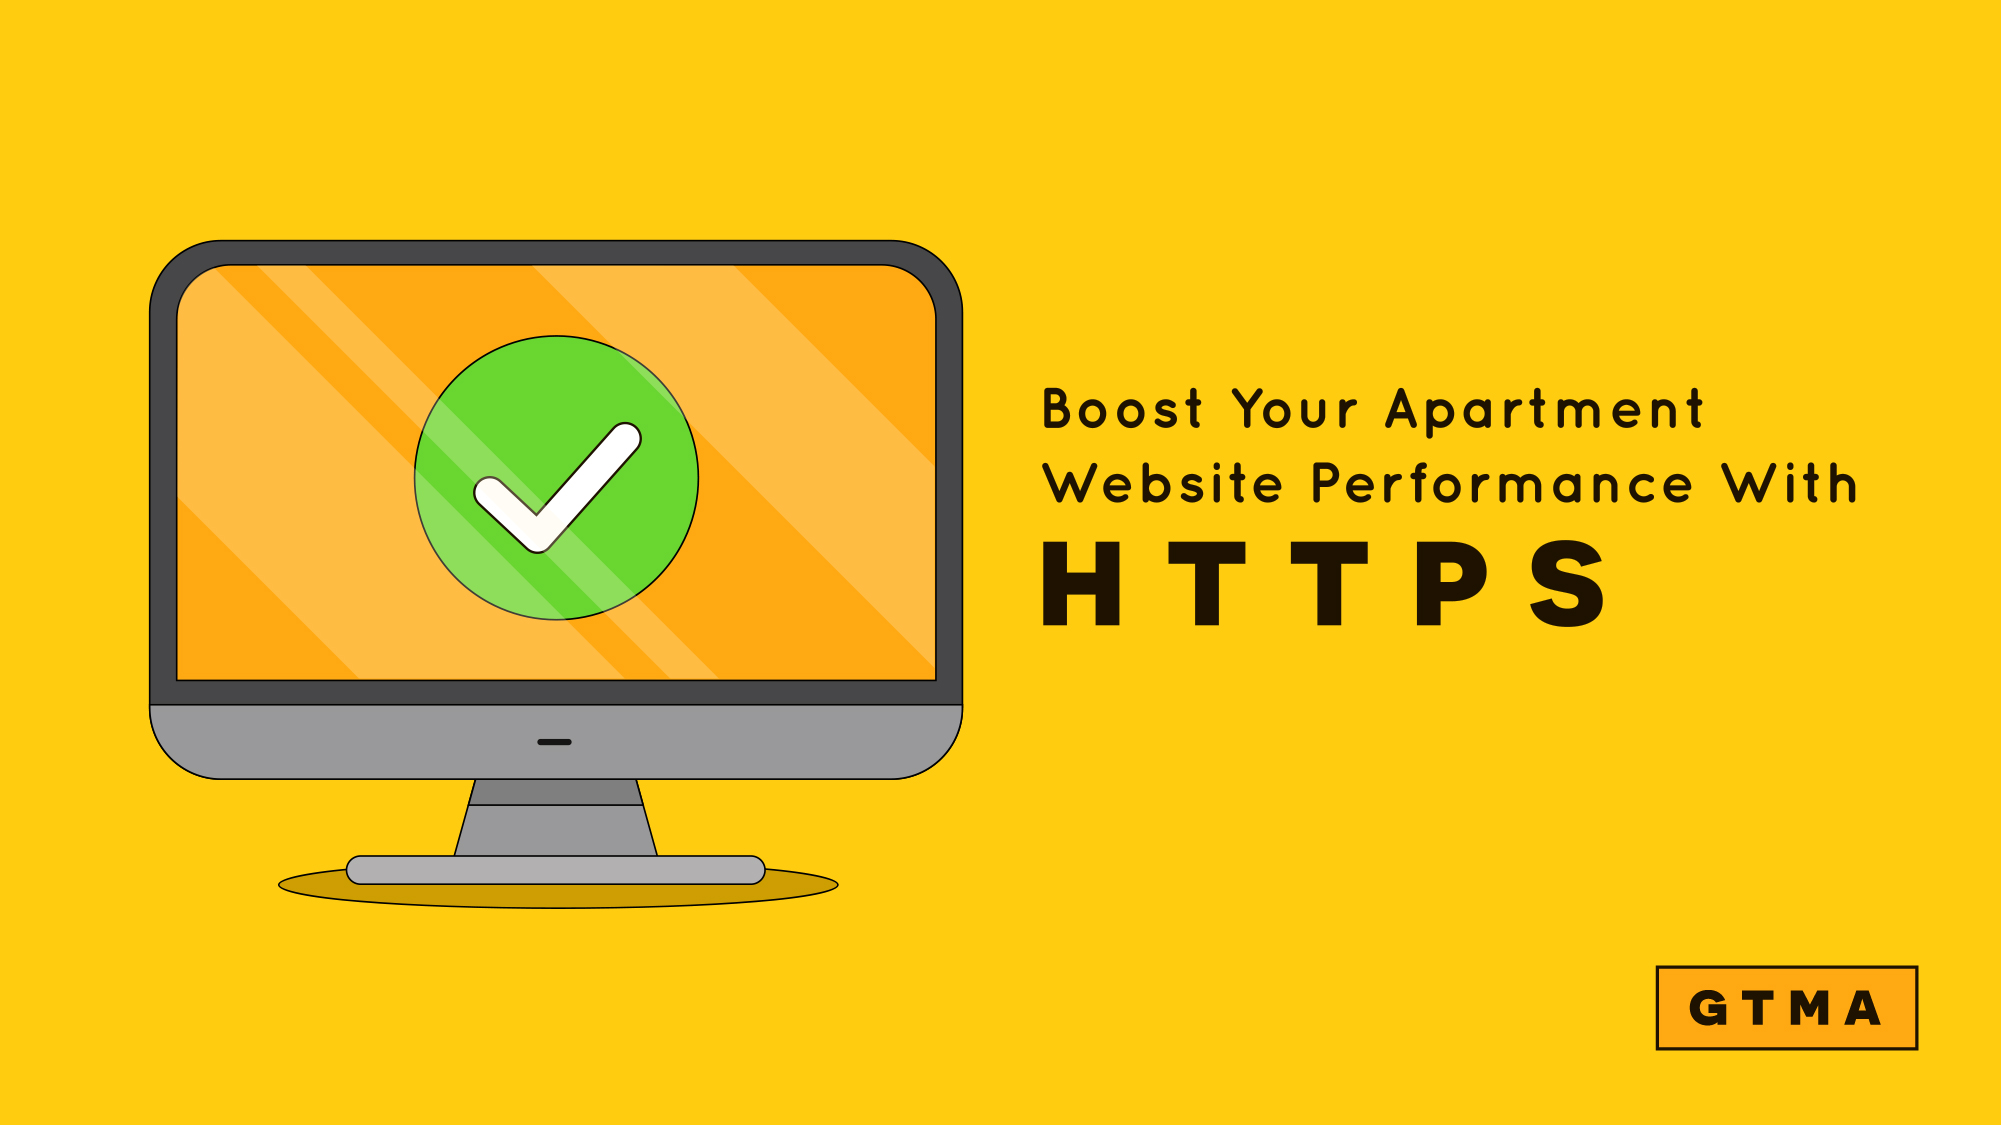 Boost Your Apartment Website Performance With HTTPS